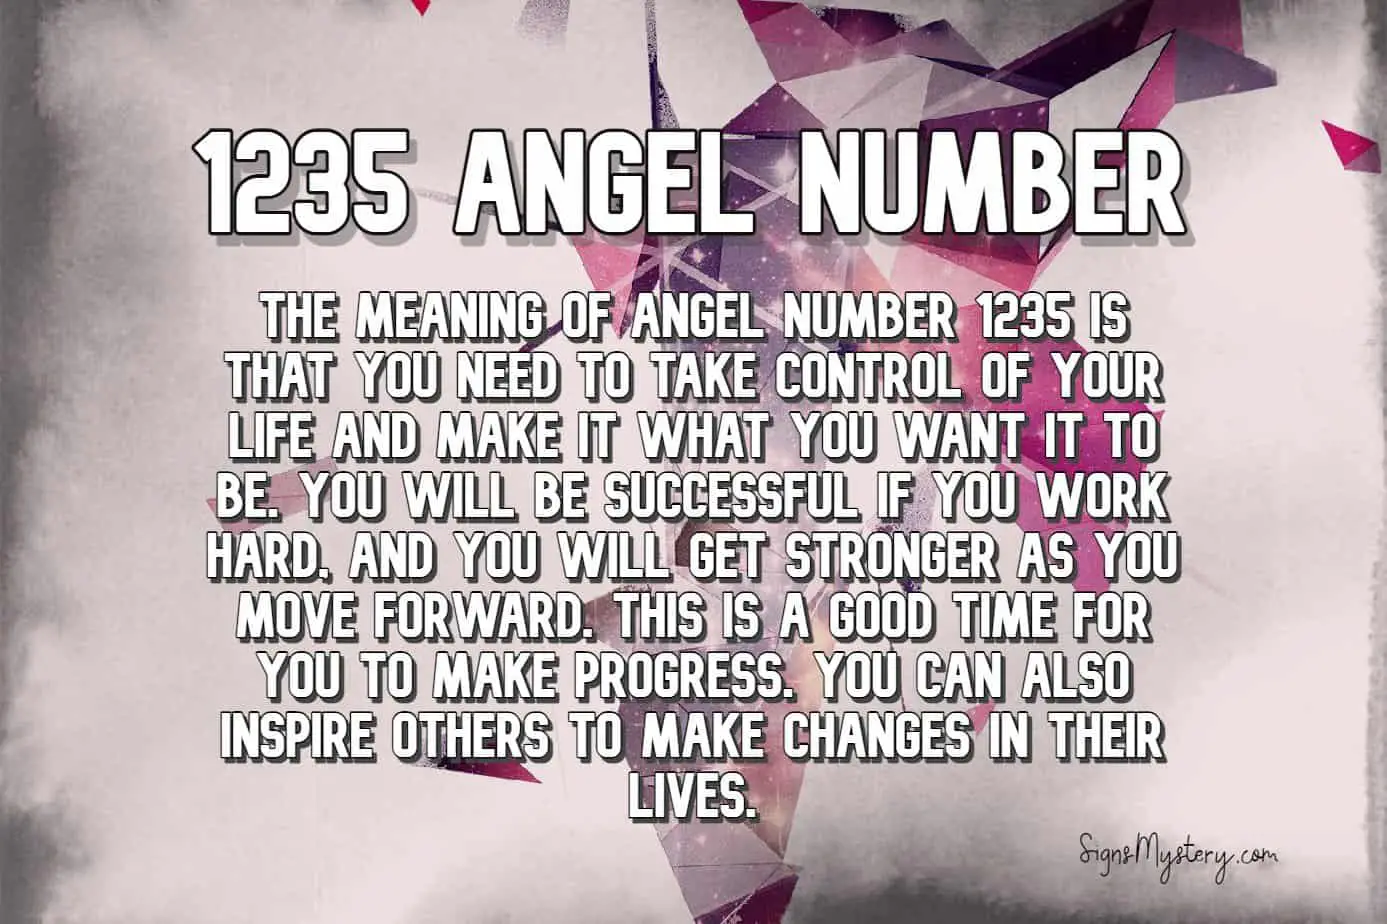 1235 angel number meaning